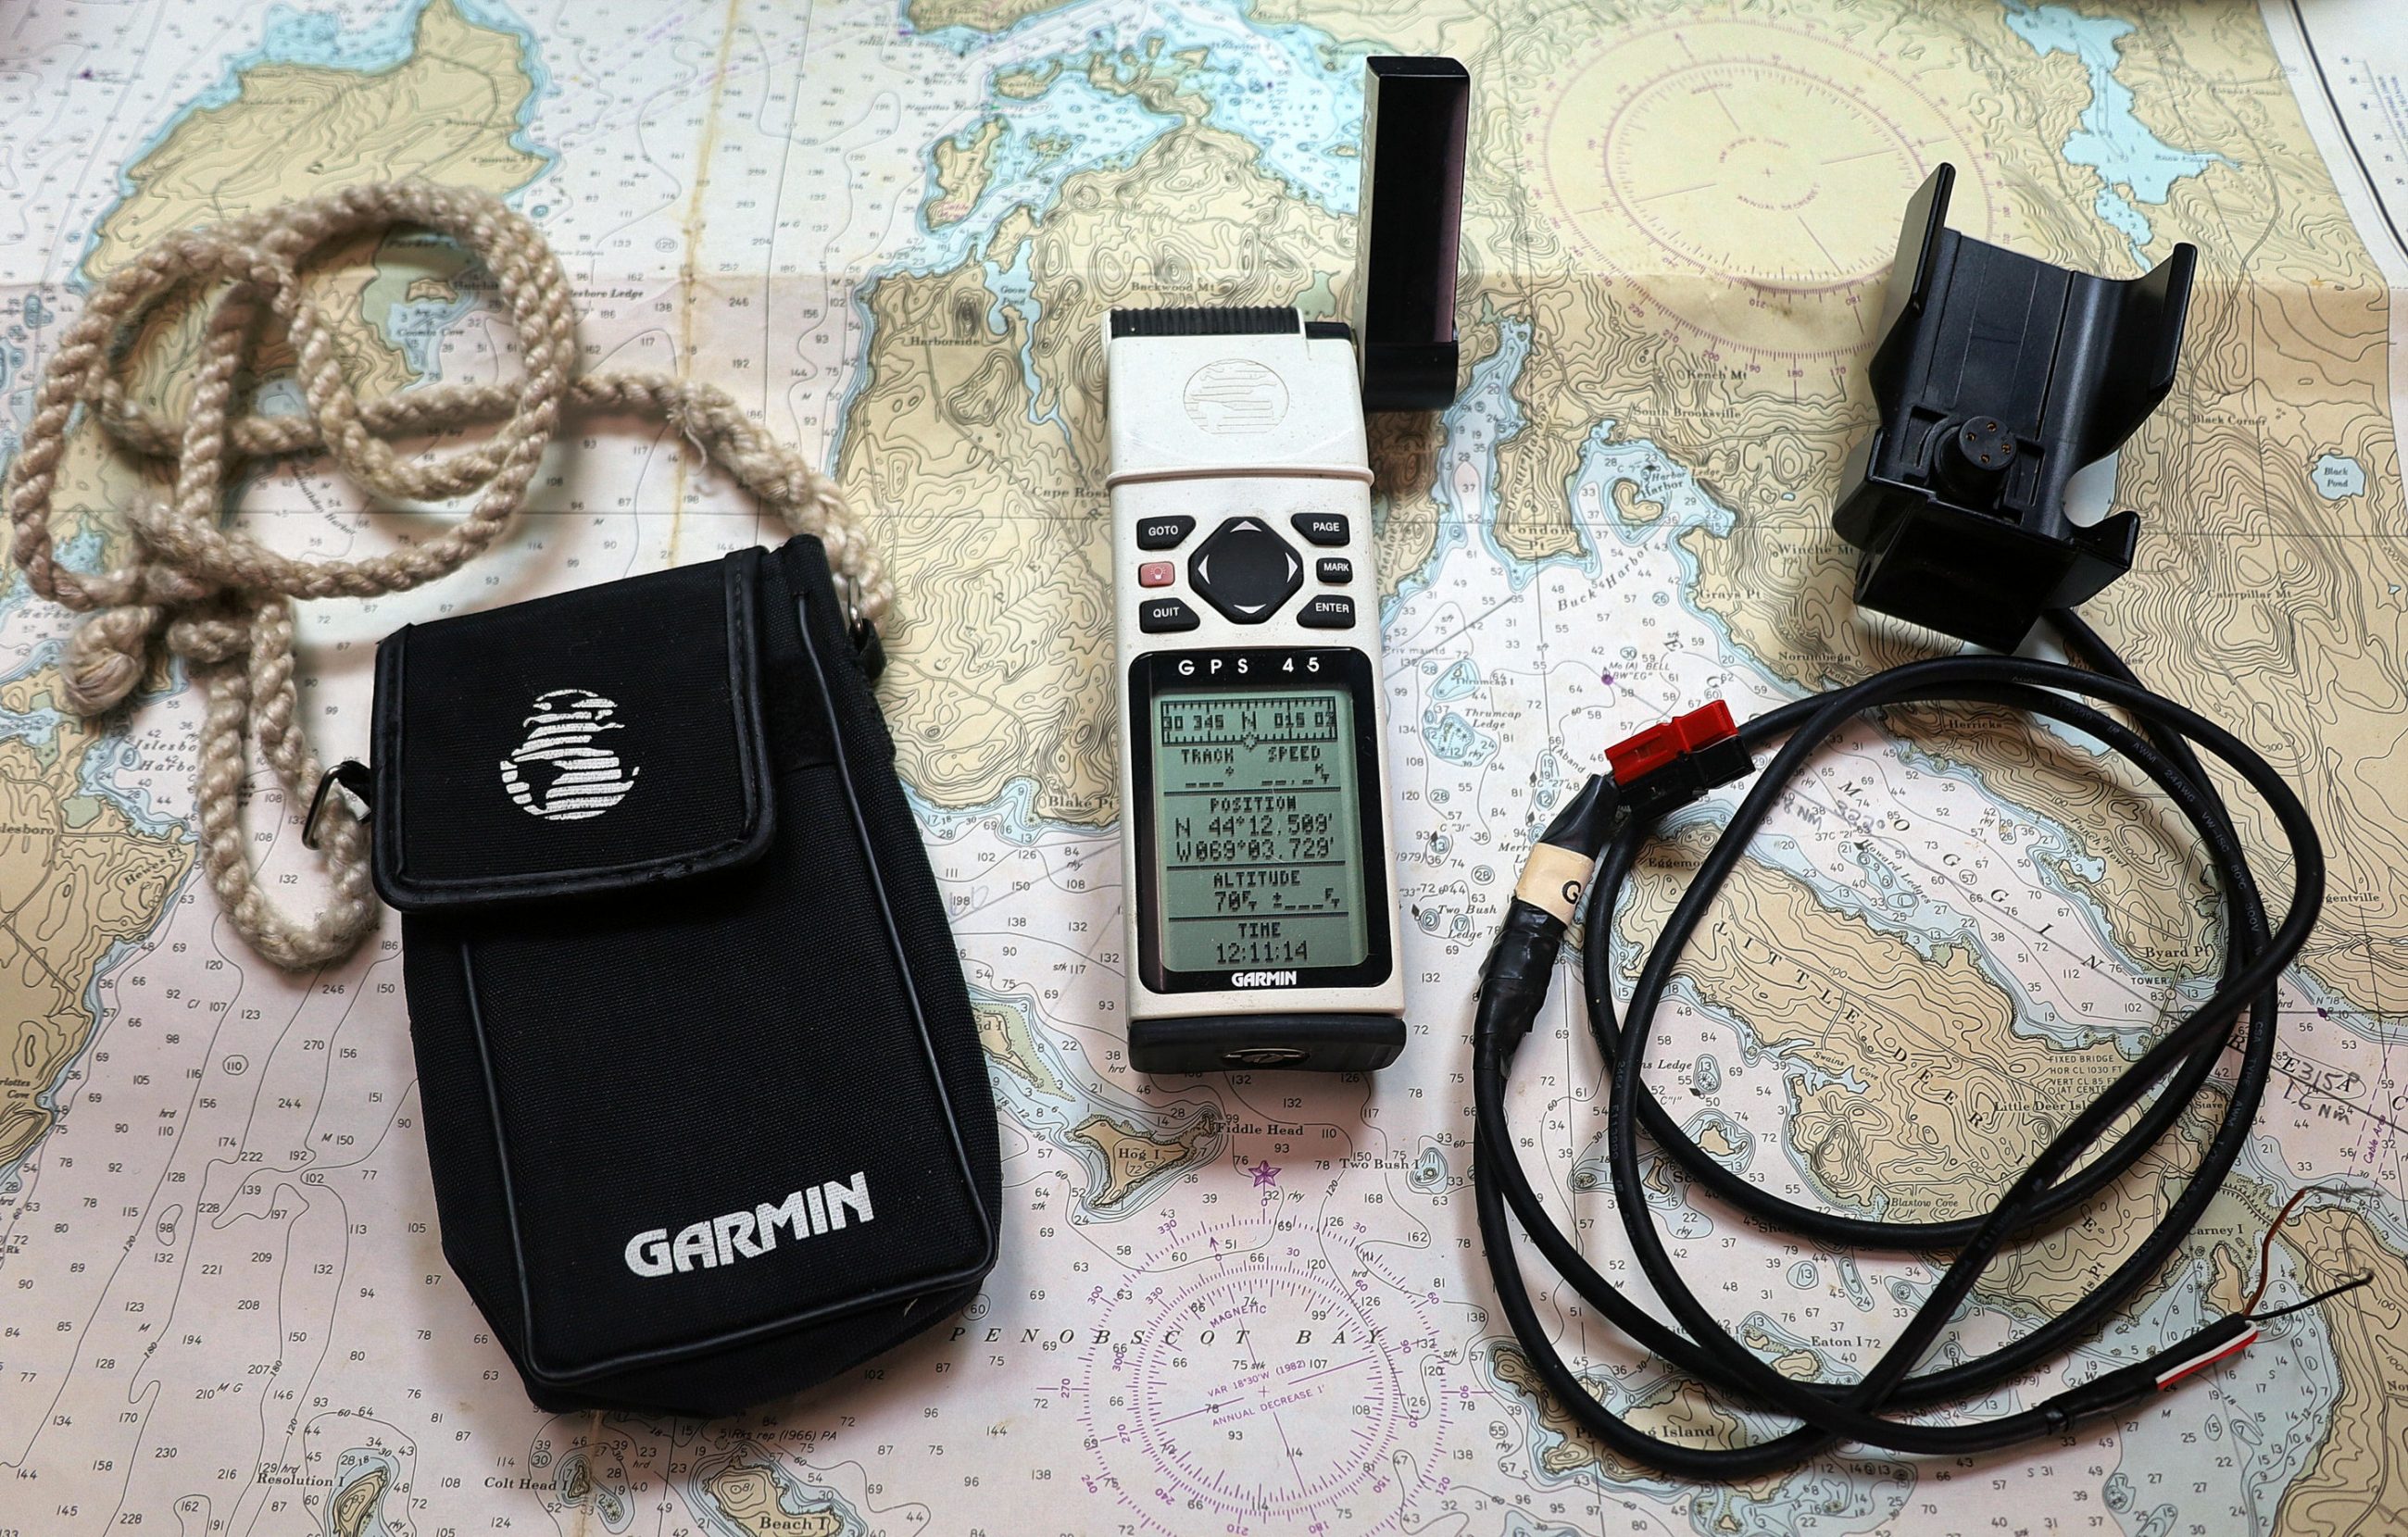 My Garmin GPS 45 was amazing in 1994, and it still works (mostly) - Panbo